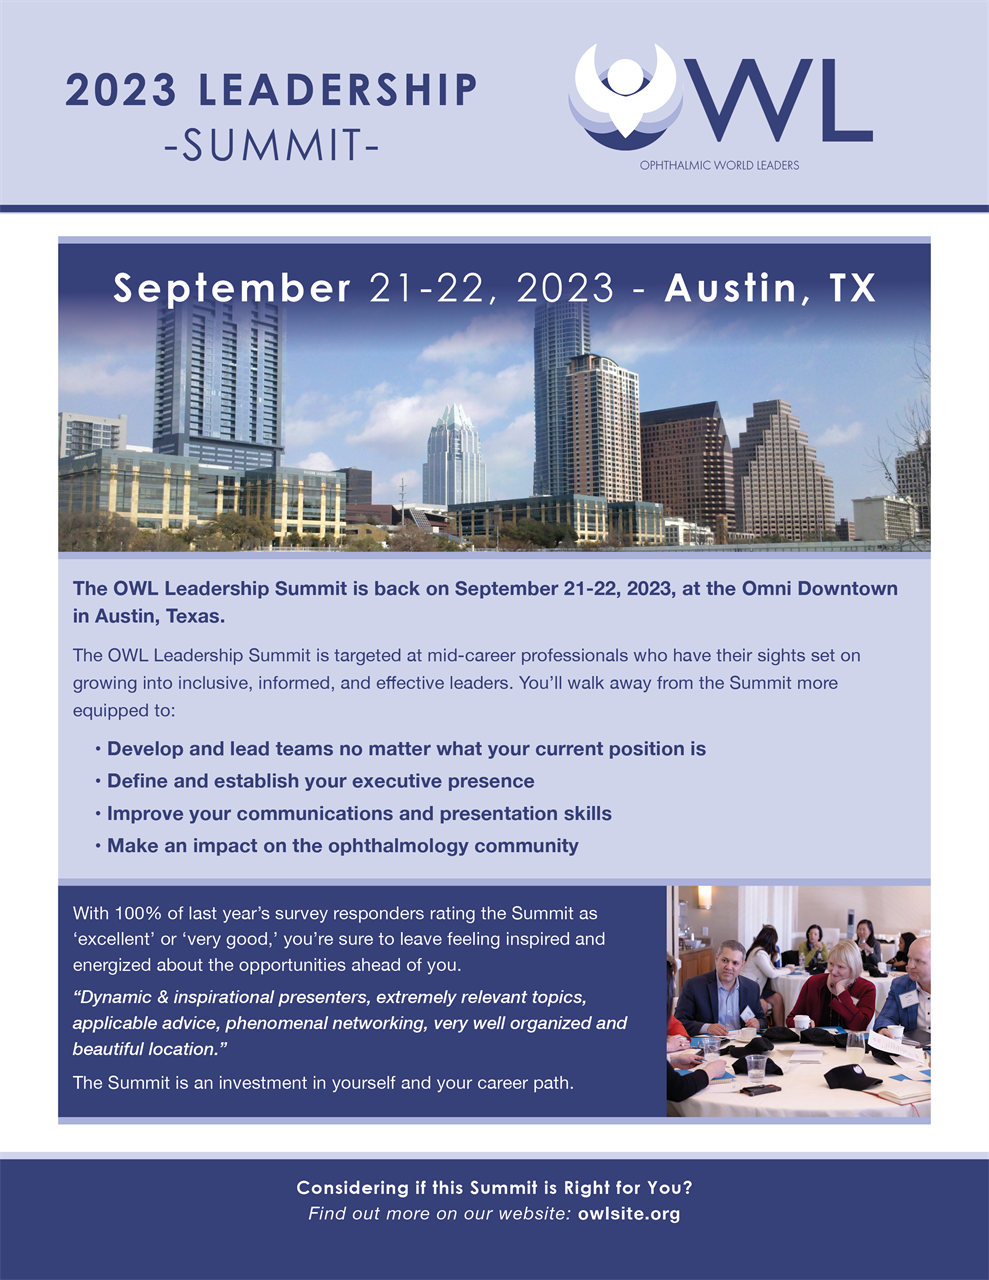 The OWL Leadership Summit is back on September 21-22, 2023, at the Omni Downtown in Austin, Texas. The OWL Leadership Summit is targeted at mid-career professionals who have their sights set on growing into inclusive, informed, and effective leaders. You'll walk away from the Summit more equipped to: Develop and lead teams no matter what your current position is, Define and establish your executive presence, Improve your communications and presentation skills, Make an impact on the ophthalmology community. The Summit is an investment in yourself and your career path. Sign up today!